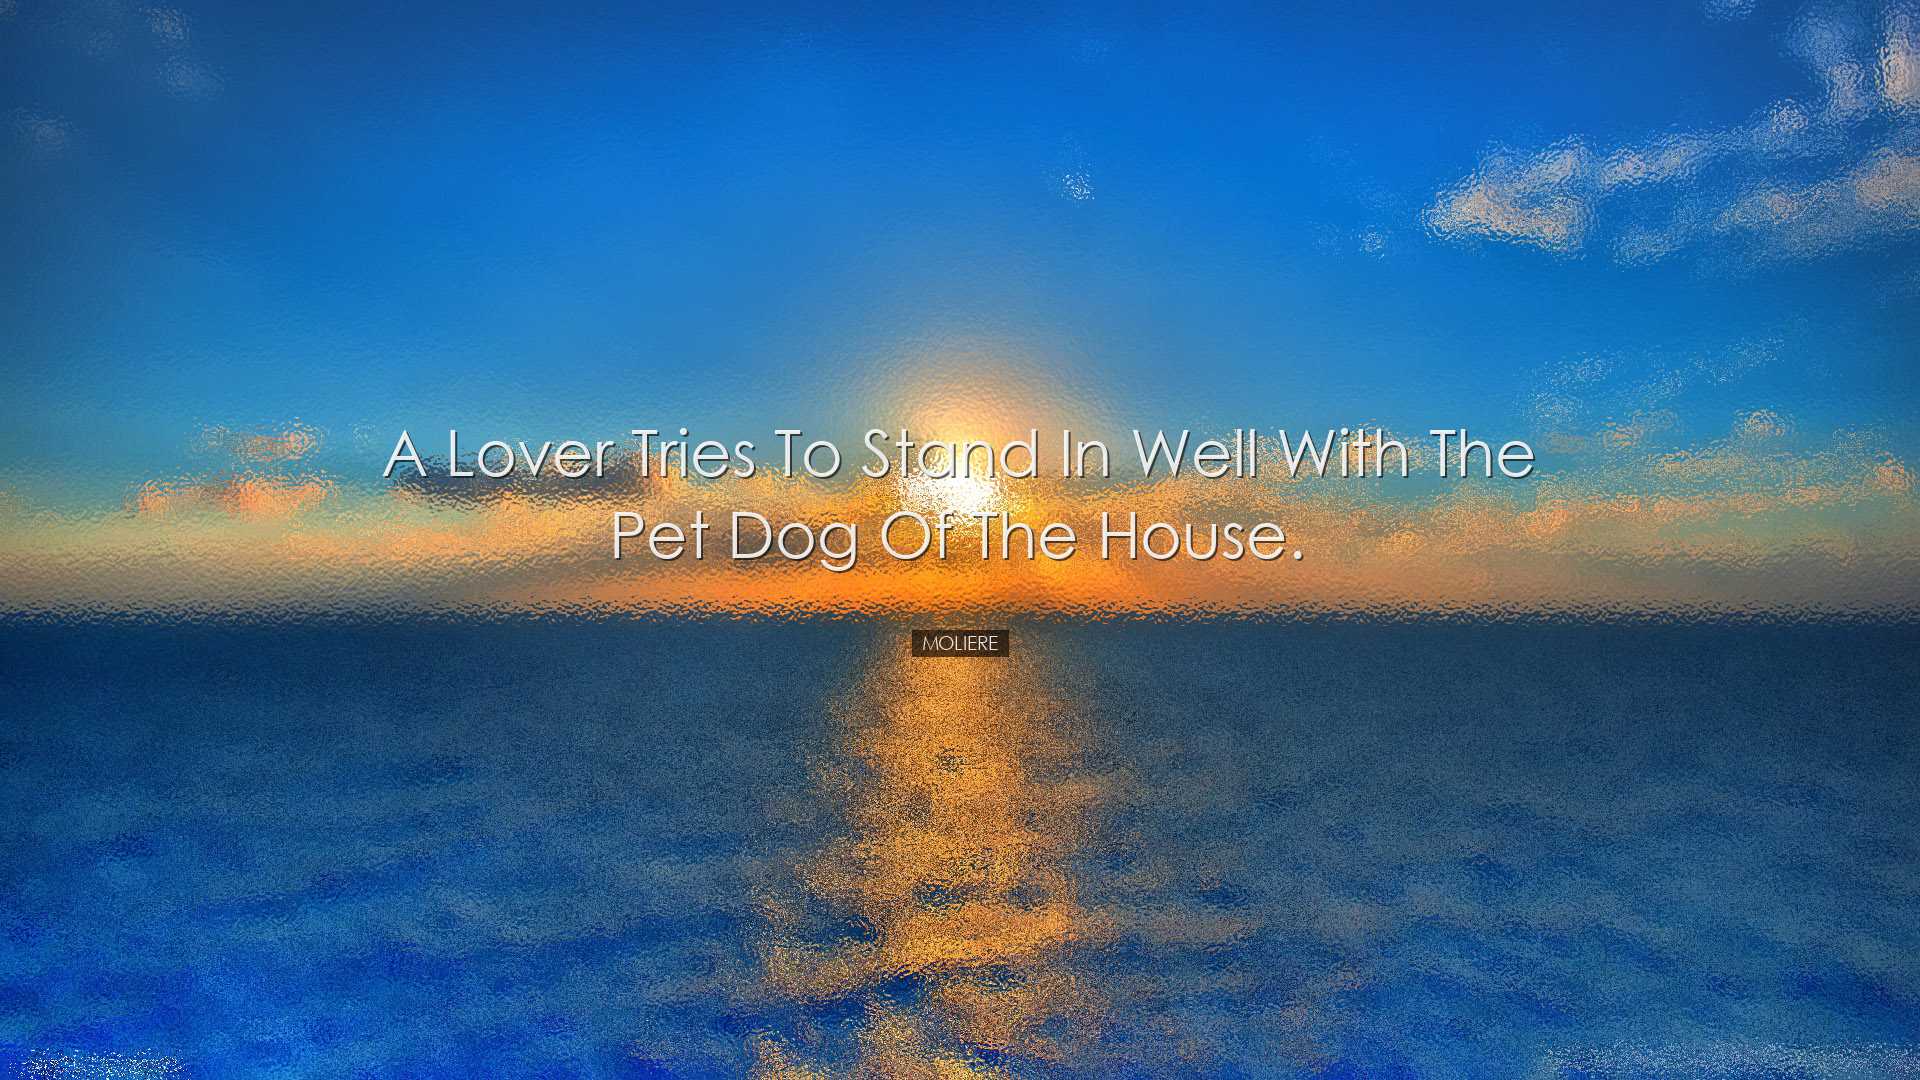 A lover tries to stand in well with the pet dog of the house. - Mo